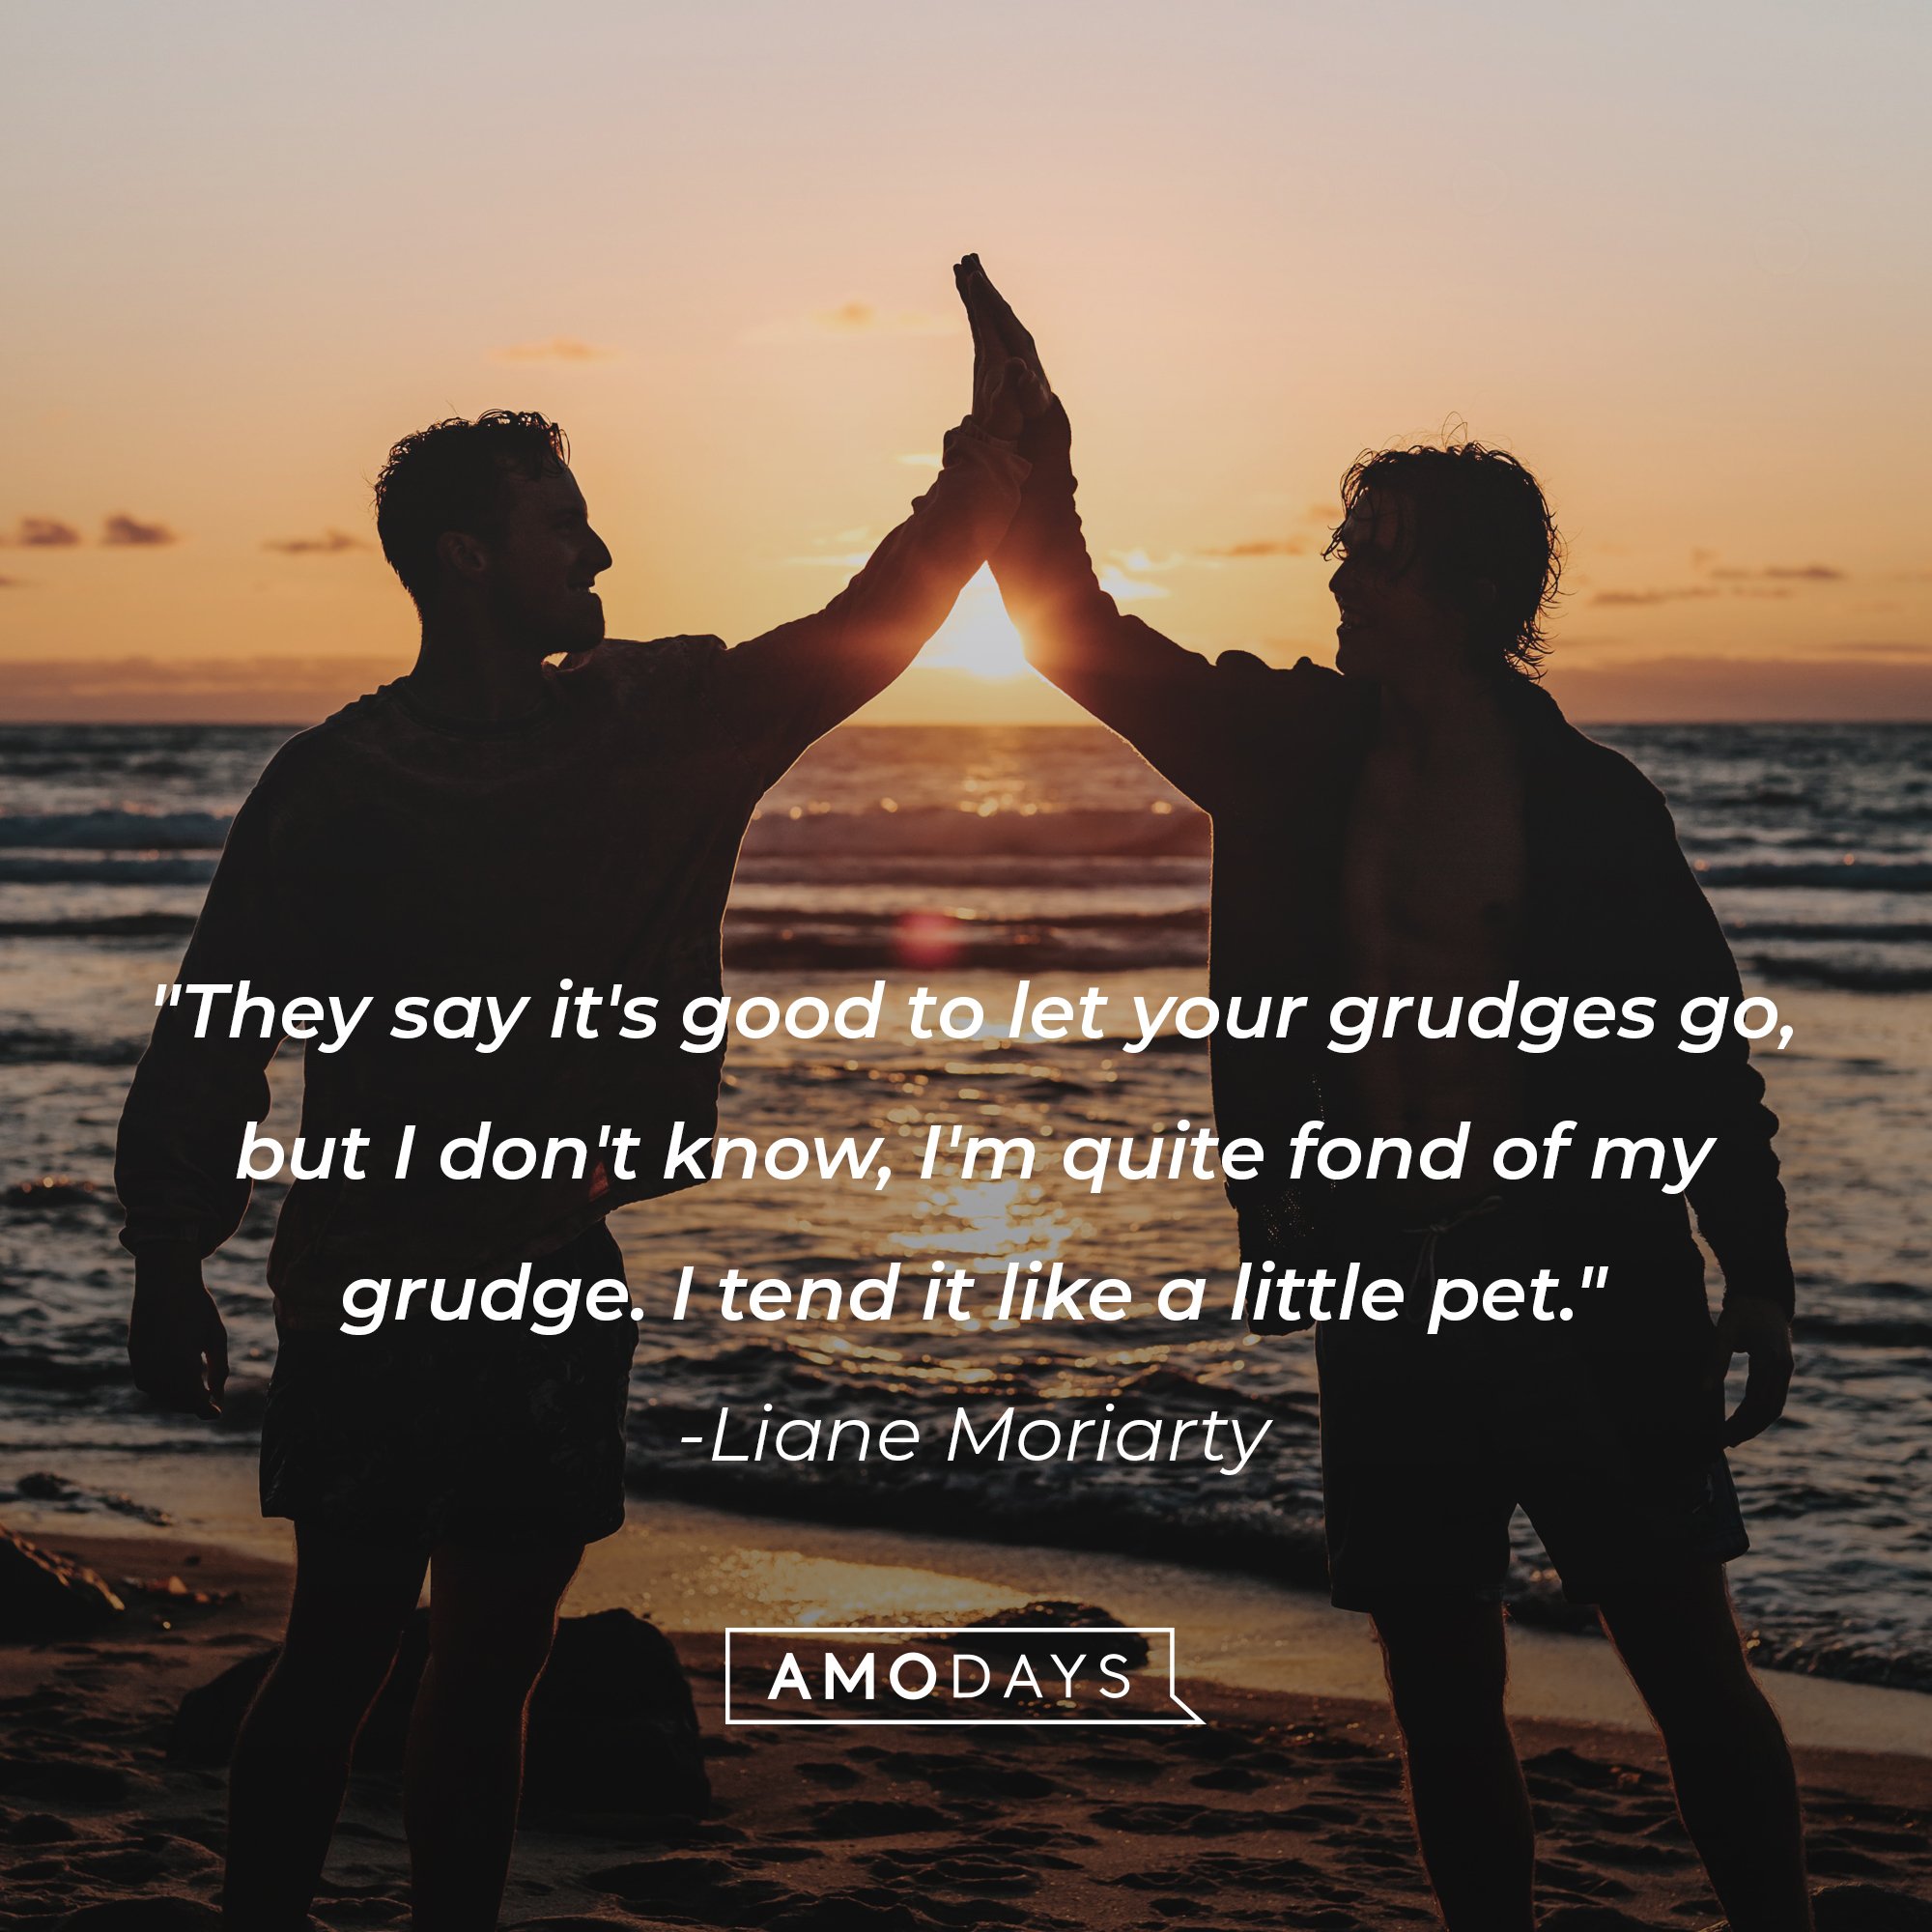 Liane Moriarty’s quote: They say it's good to let your grudges go, but I don't know, I'm quite fond of my grudge. I tend it like a little pet." | Image: AmoDays     